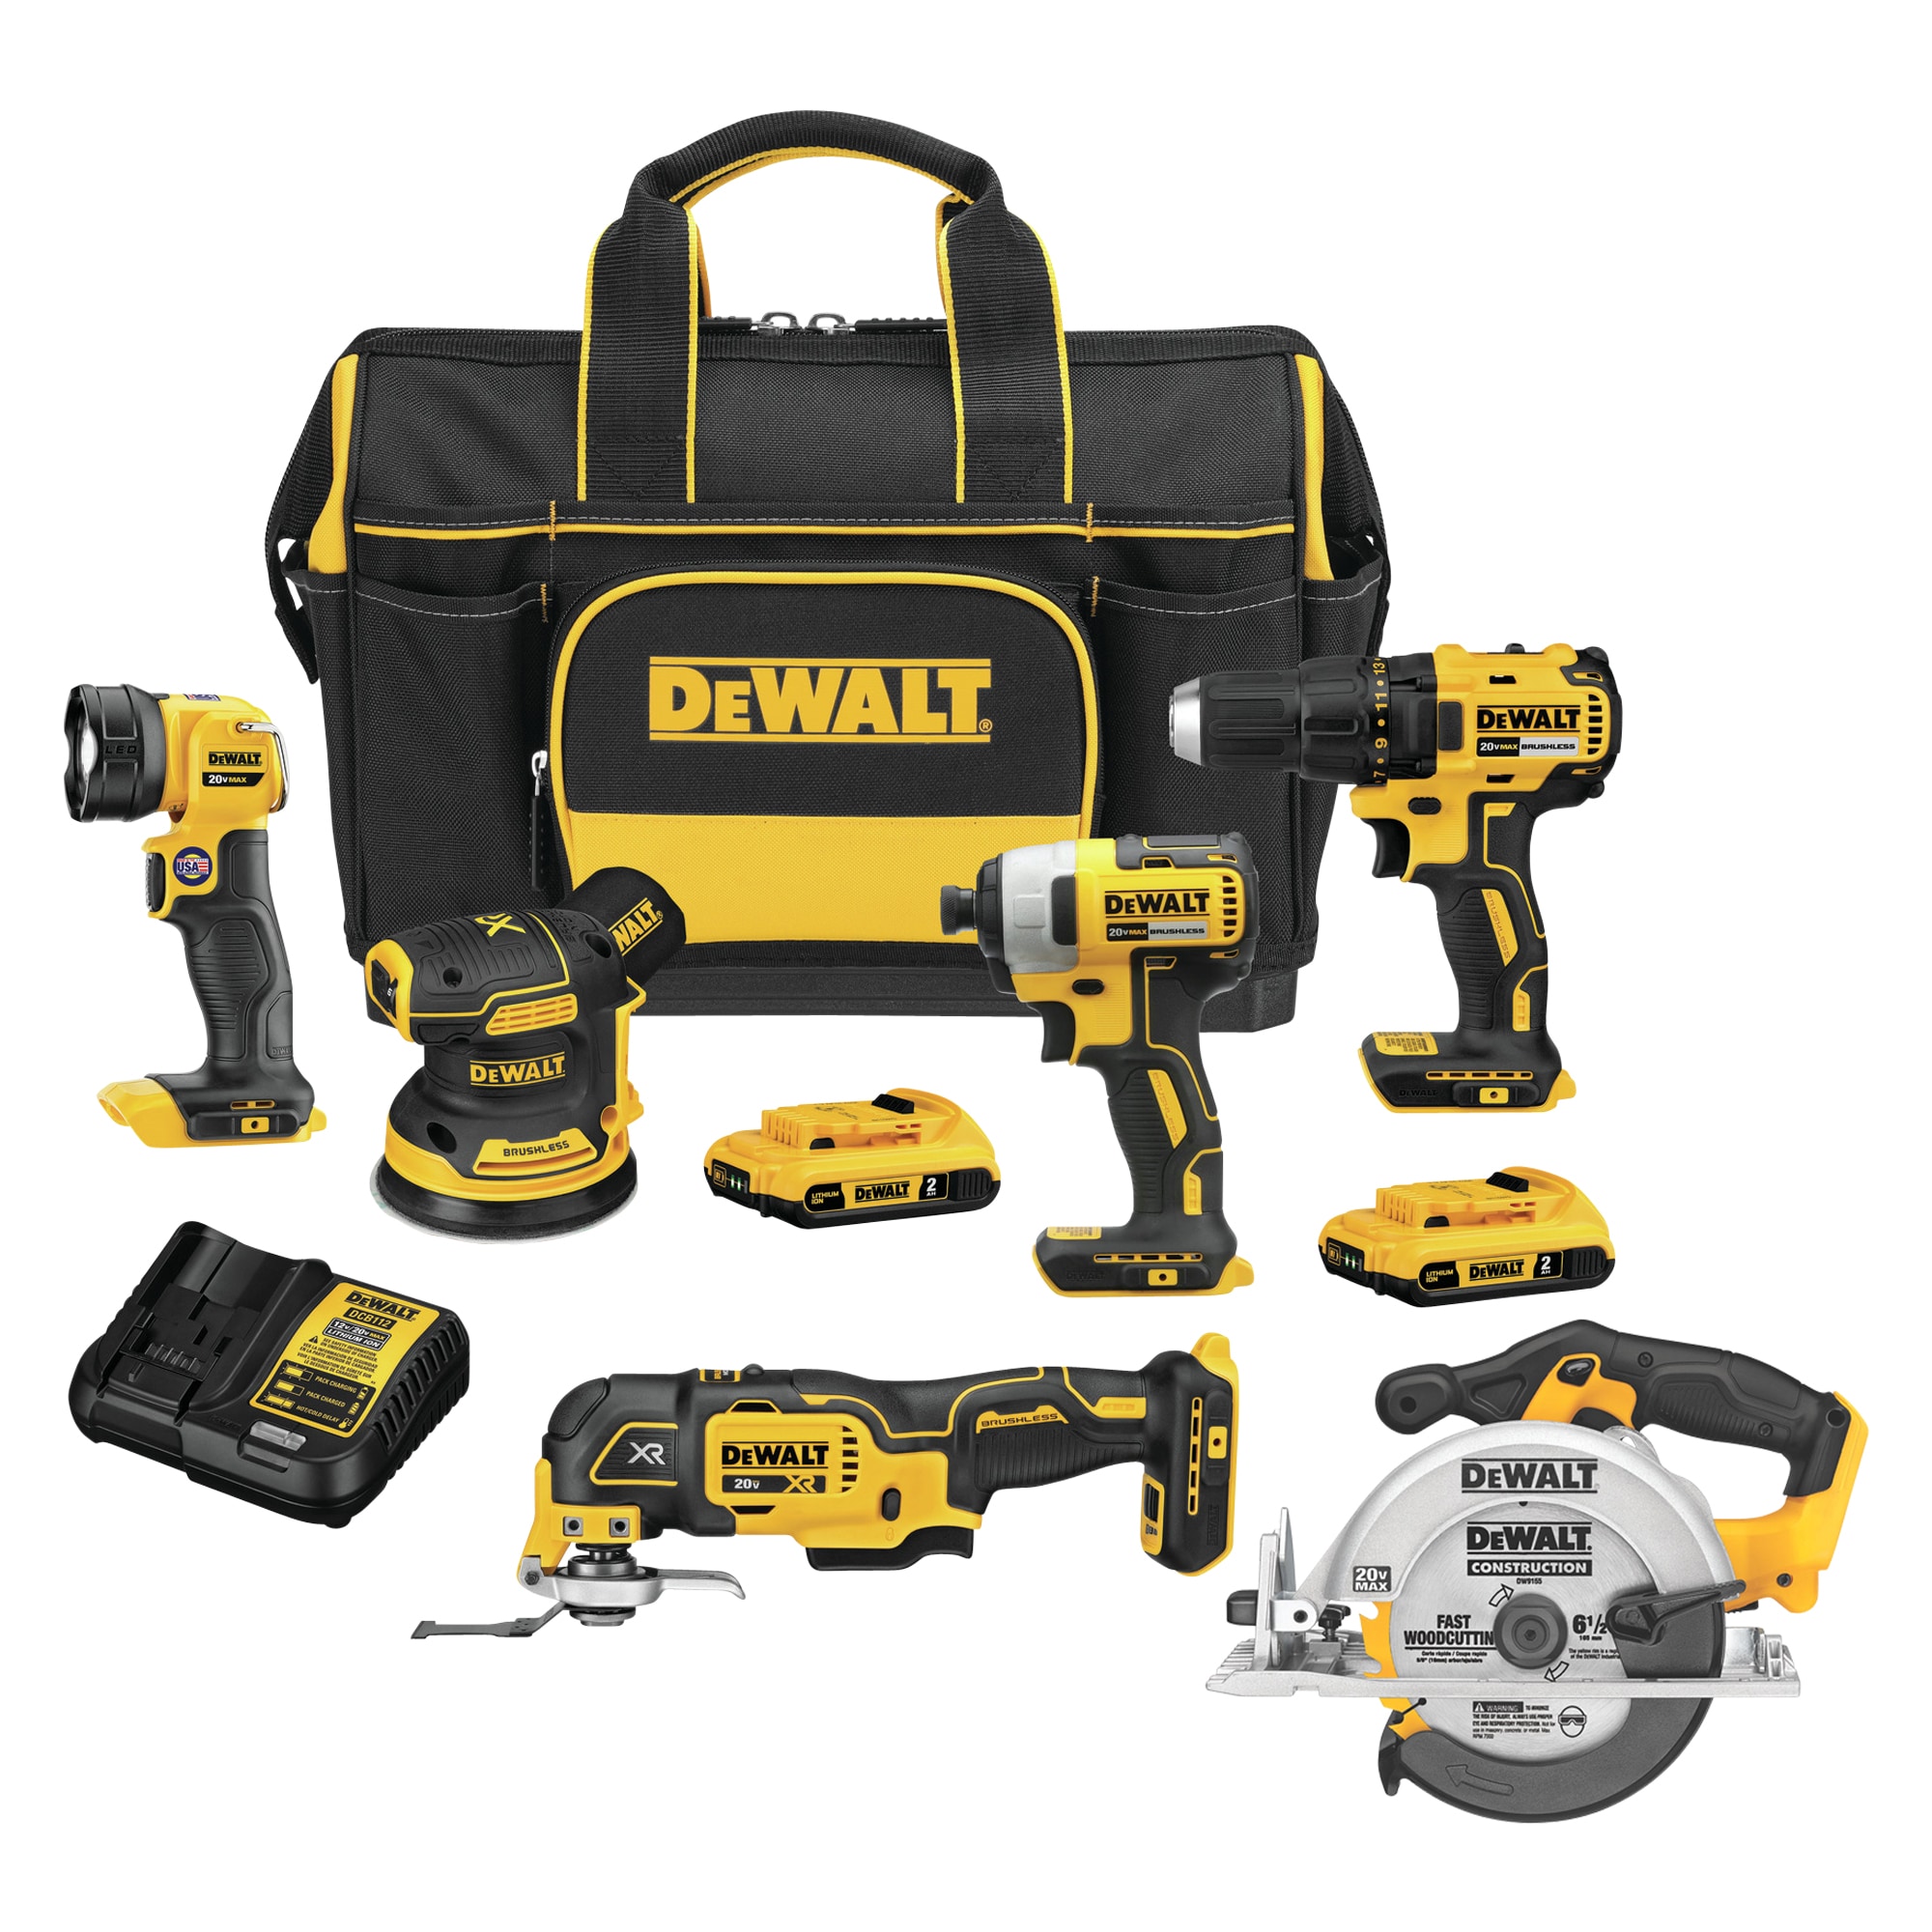 DEWALT 5-Tool 20-Volt Max Brushless Power Tool Combo Kit with Soft Case (2-Batteries and charger Included) & 20-Volt Max 6-1/2-in Cordless Circular